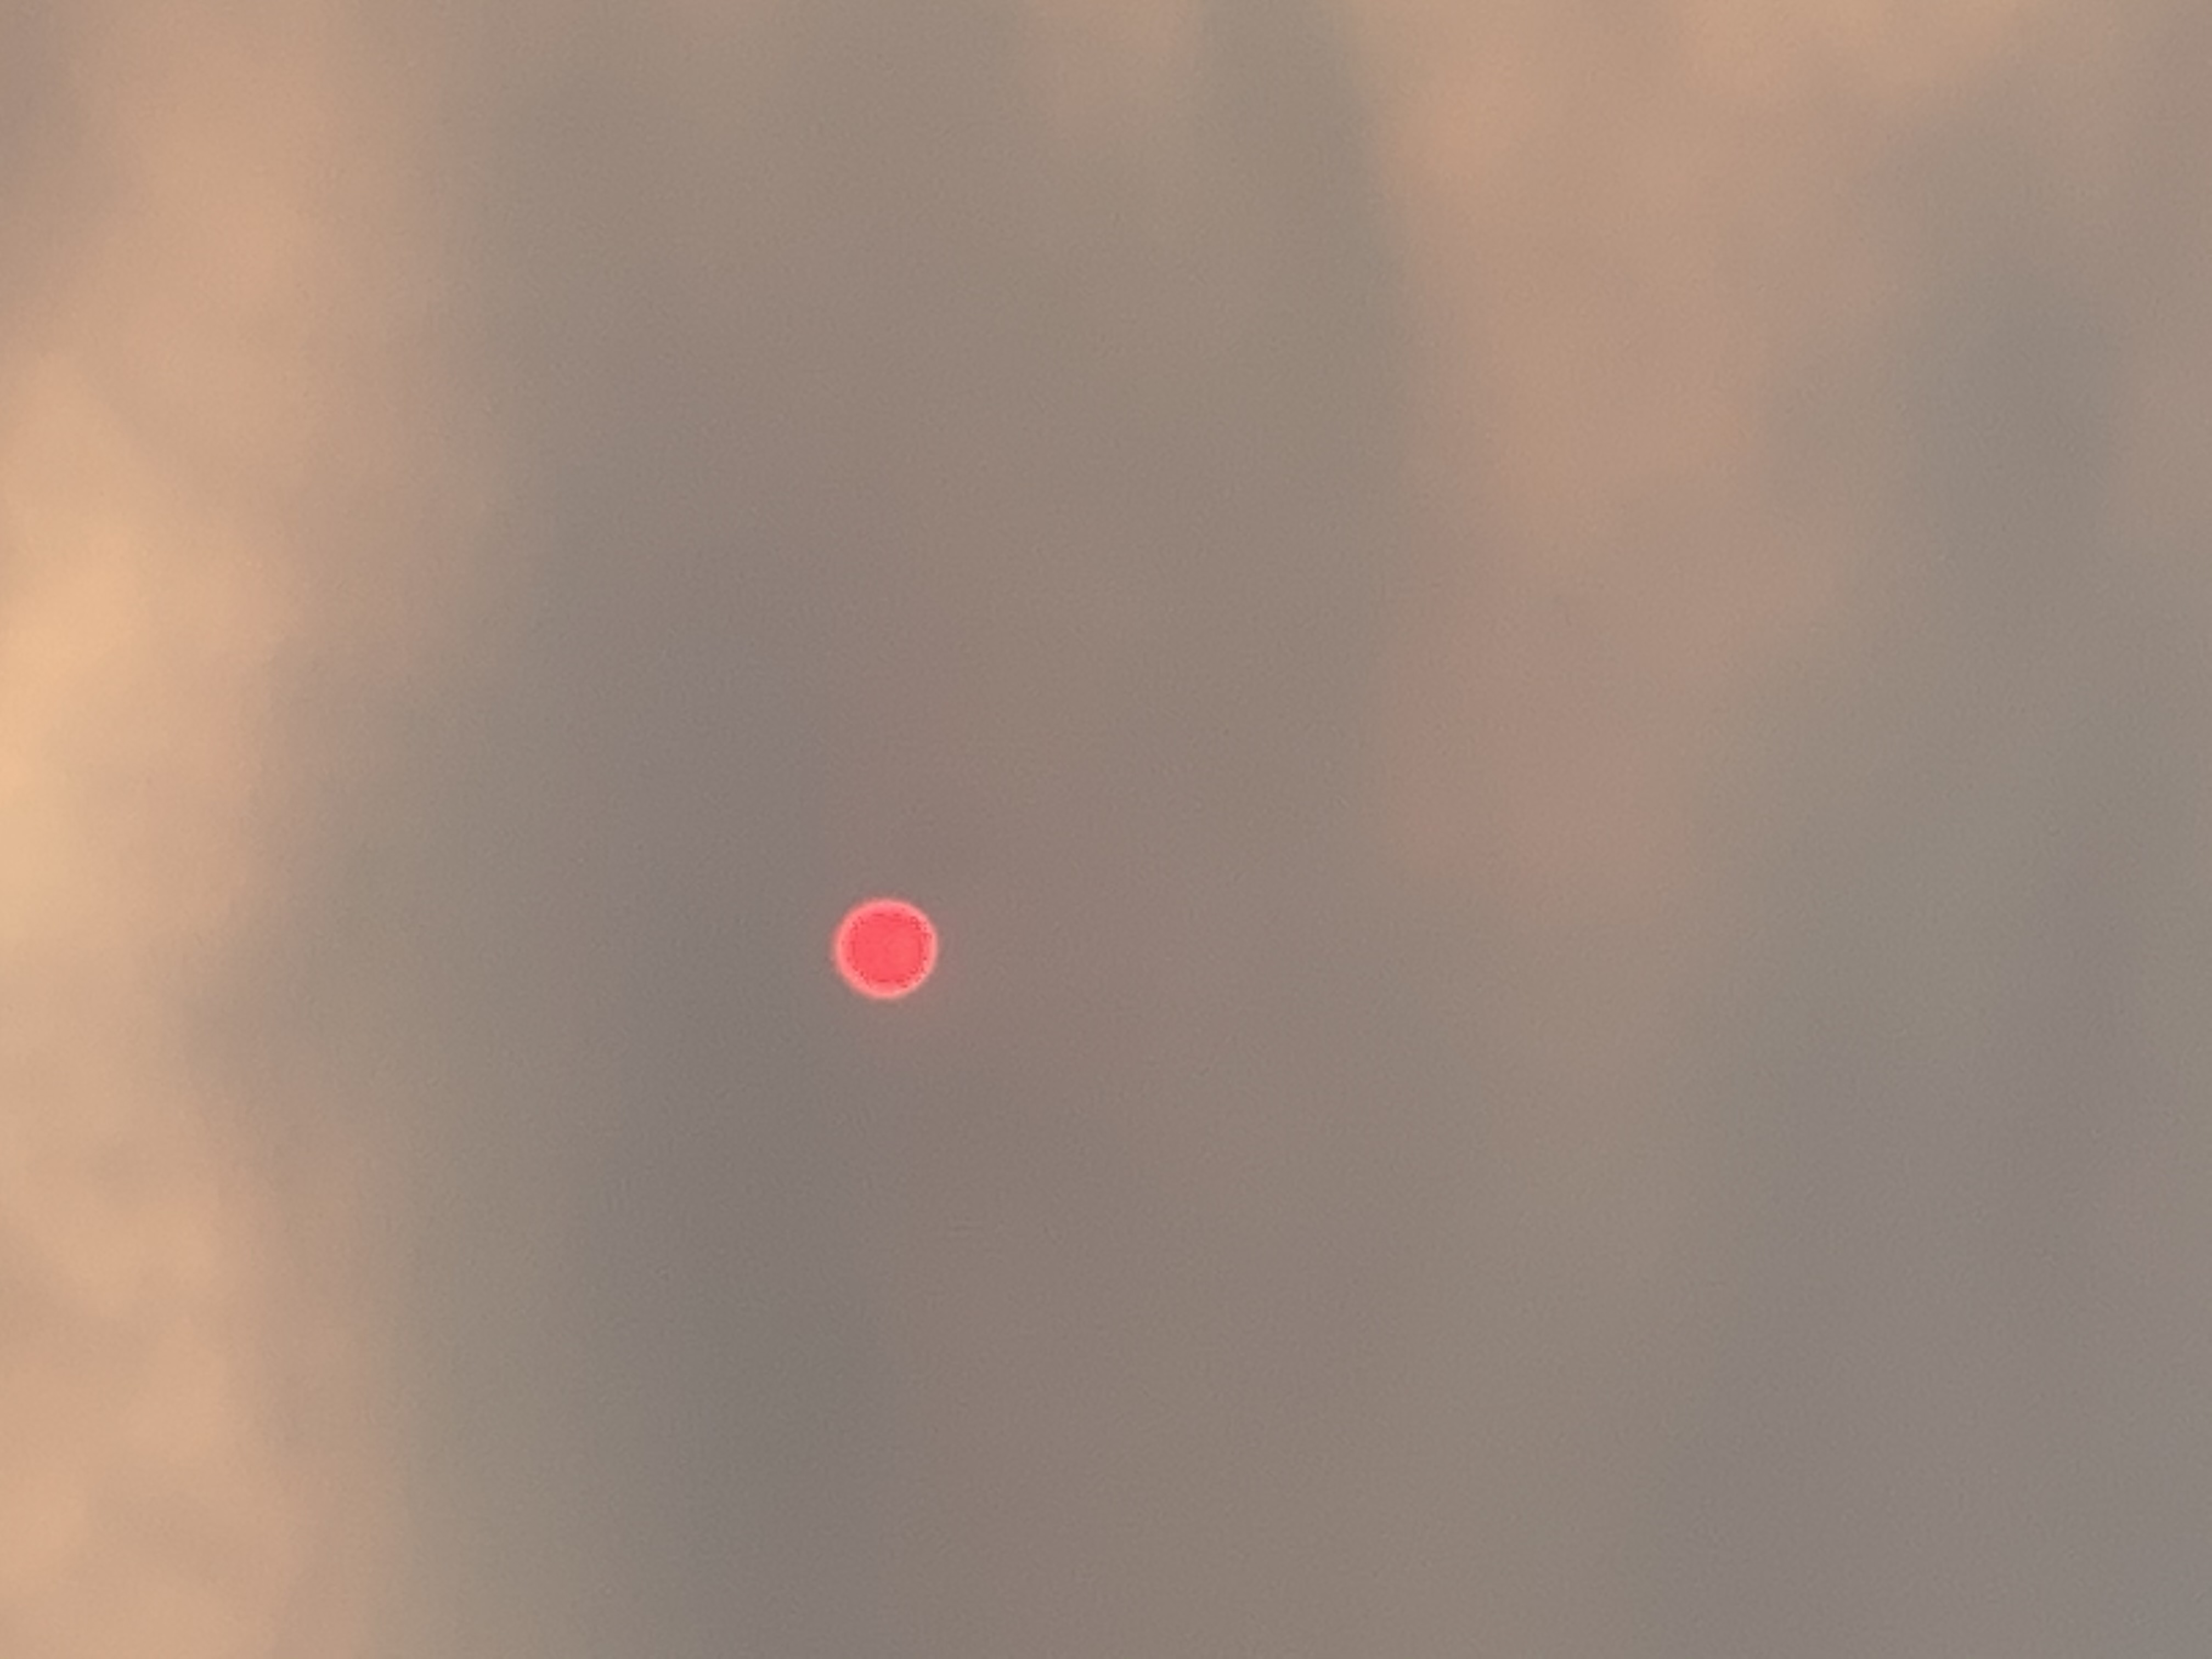 A 'red sun' photo taken by Prof Negishi from Nepean Hospital during the bushfire smog